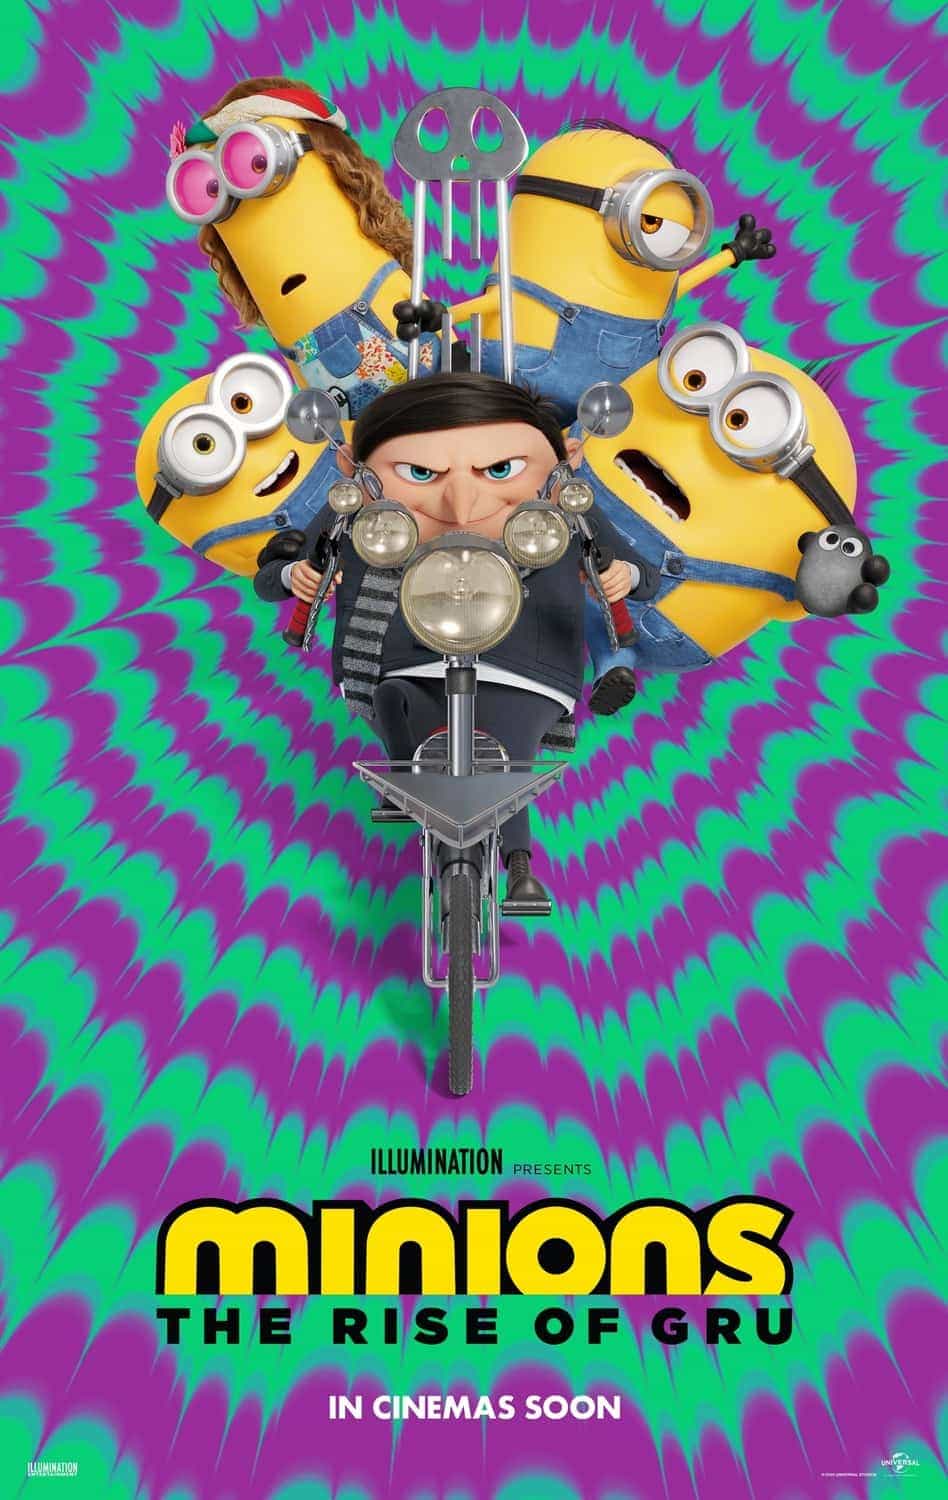 Minions: The Rise of Gru is given a U age rating in the UK for mild comic violence, very mild scary scenes, rude humour, language